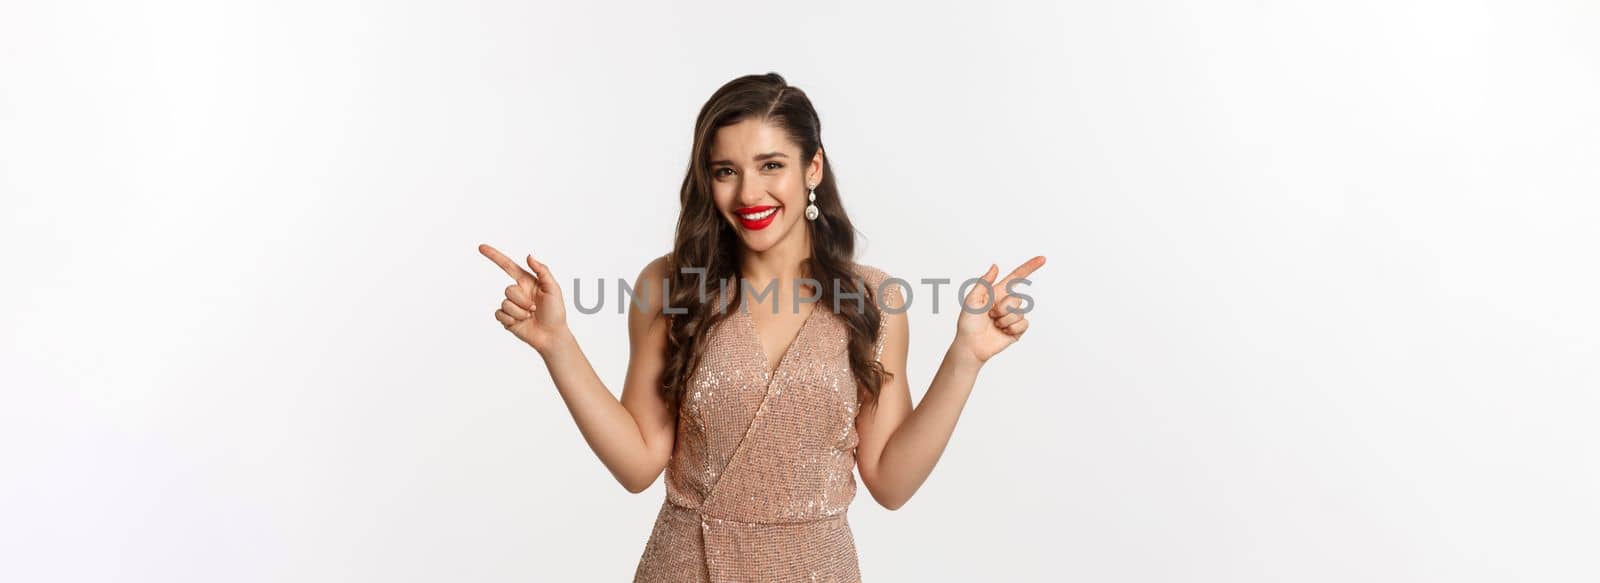 Party. Beautiful woman in elegant dress, with red lips, pointing fingers sideways, showing left and right promo offers, smiling and looking at camera, white background.